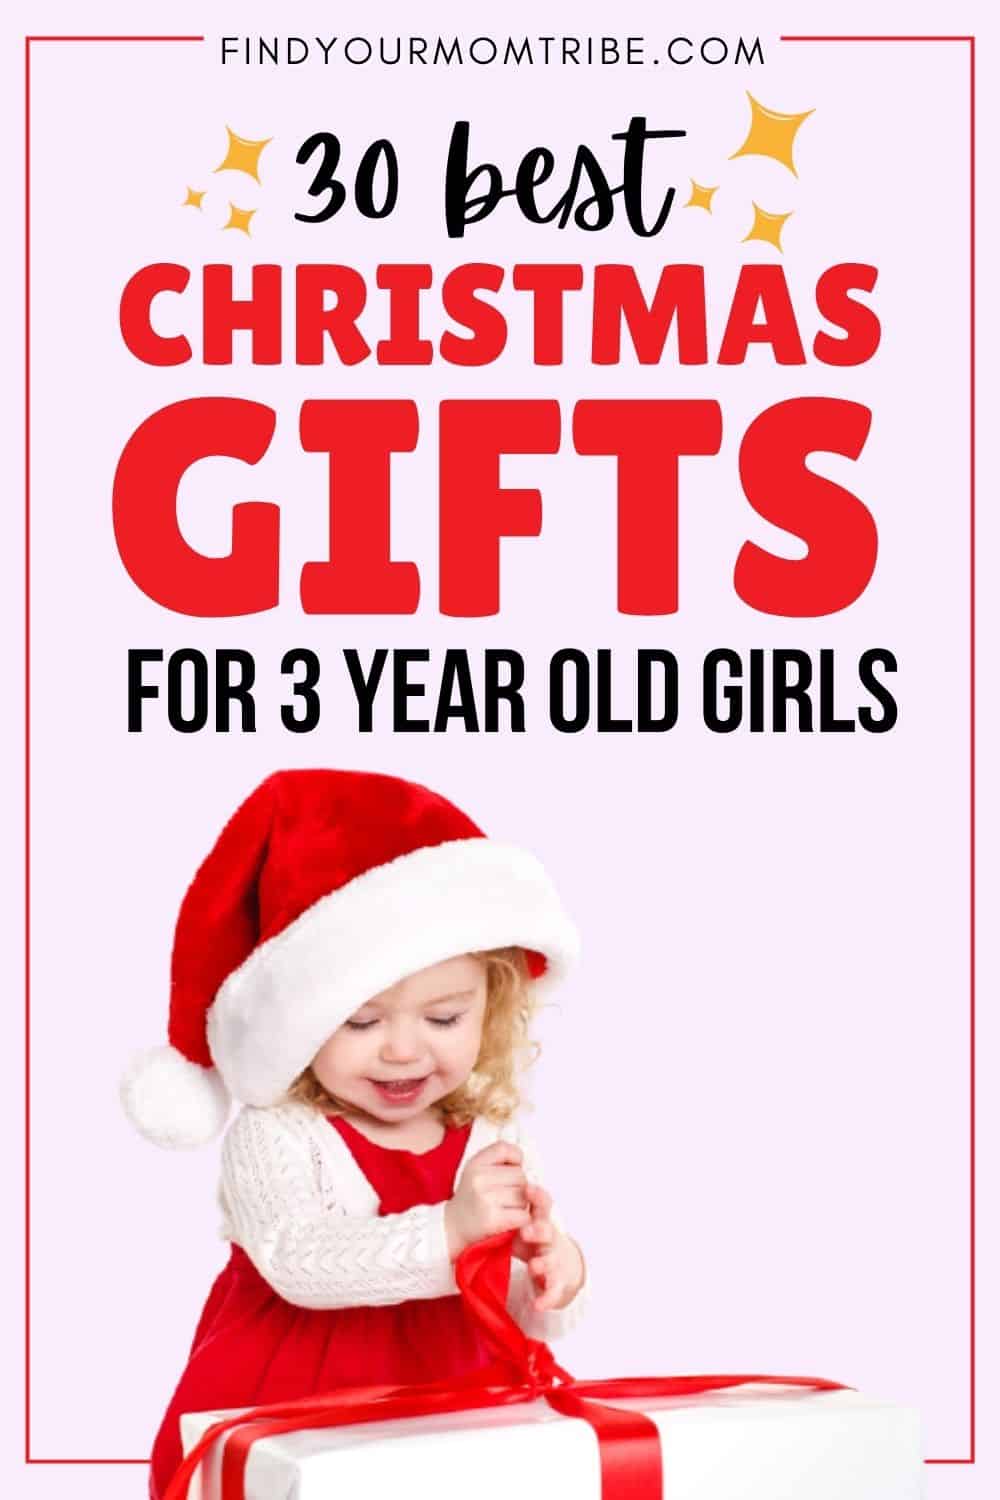 30 Best Christmas Gifts For 3 Year Old Girls Pinterest